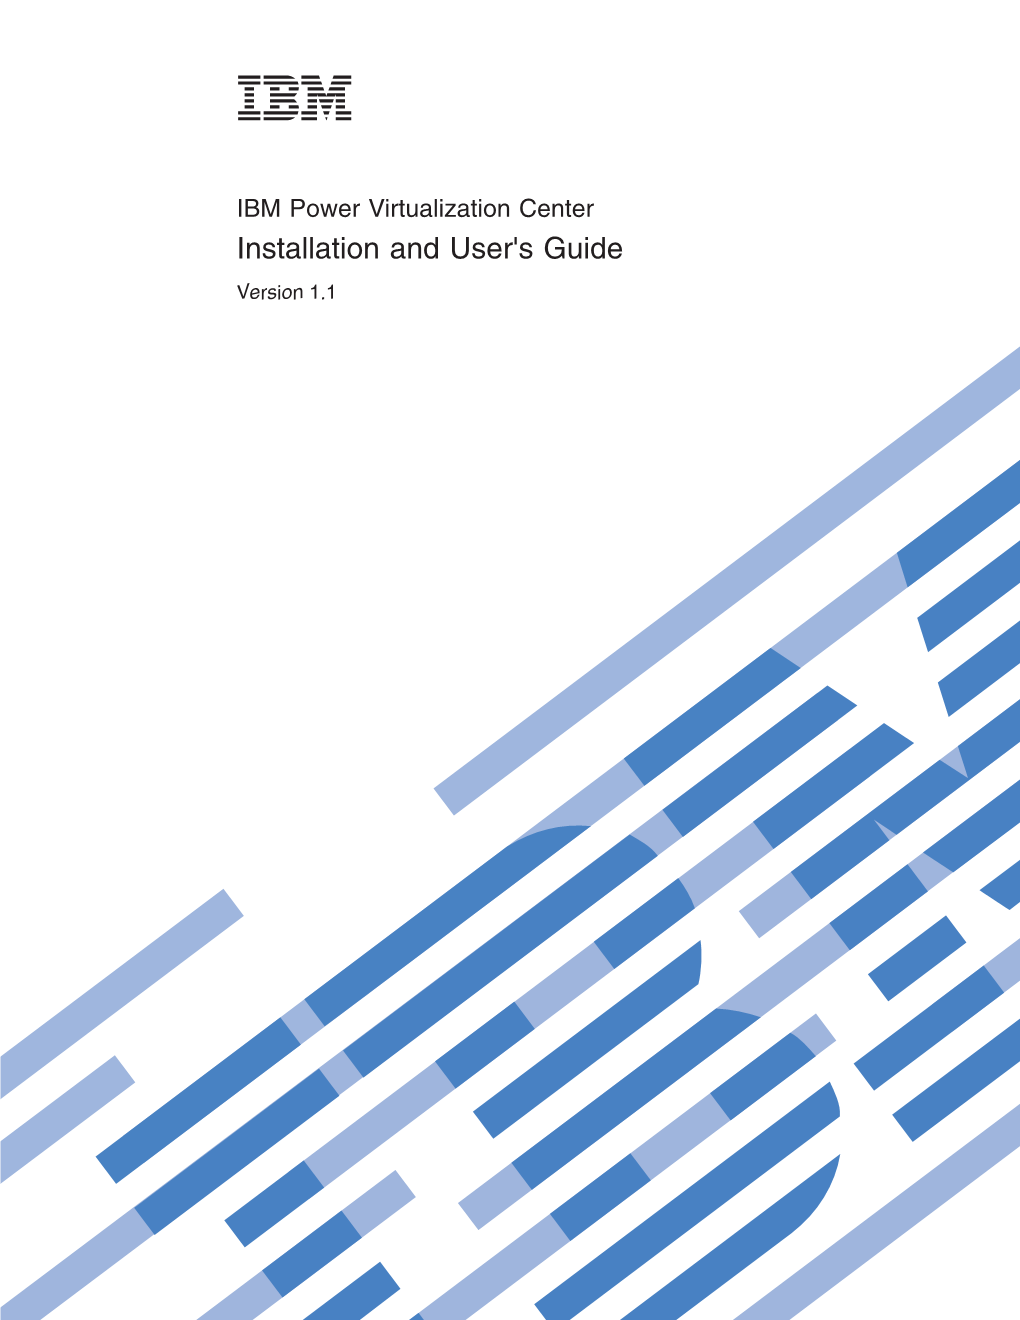 IBM Power Virtualization Center Installation and User's Guide Version 1.1